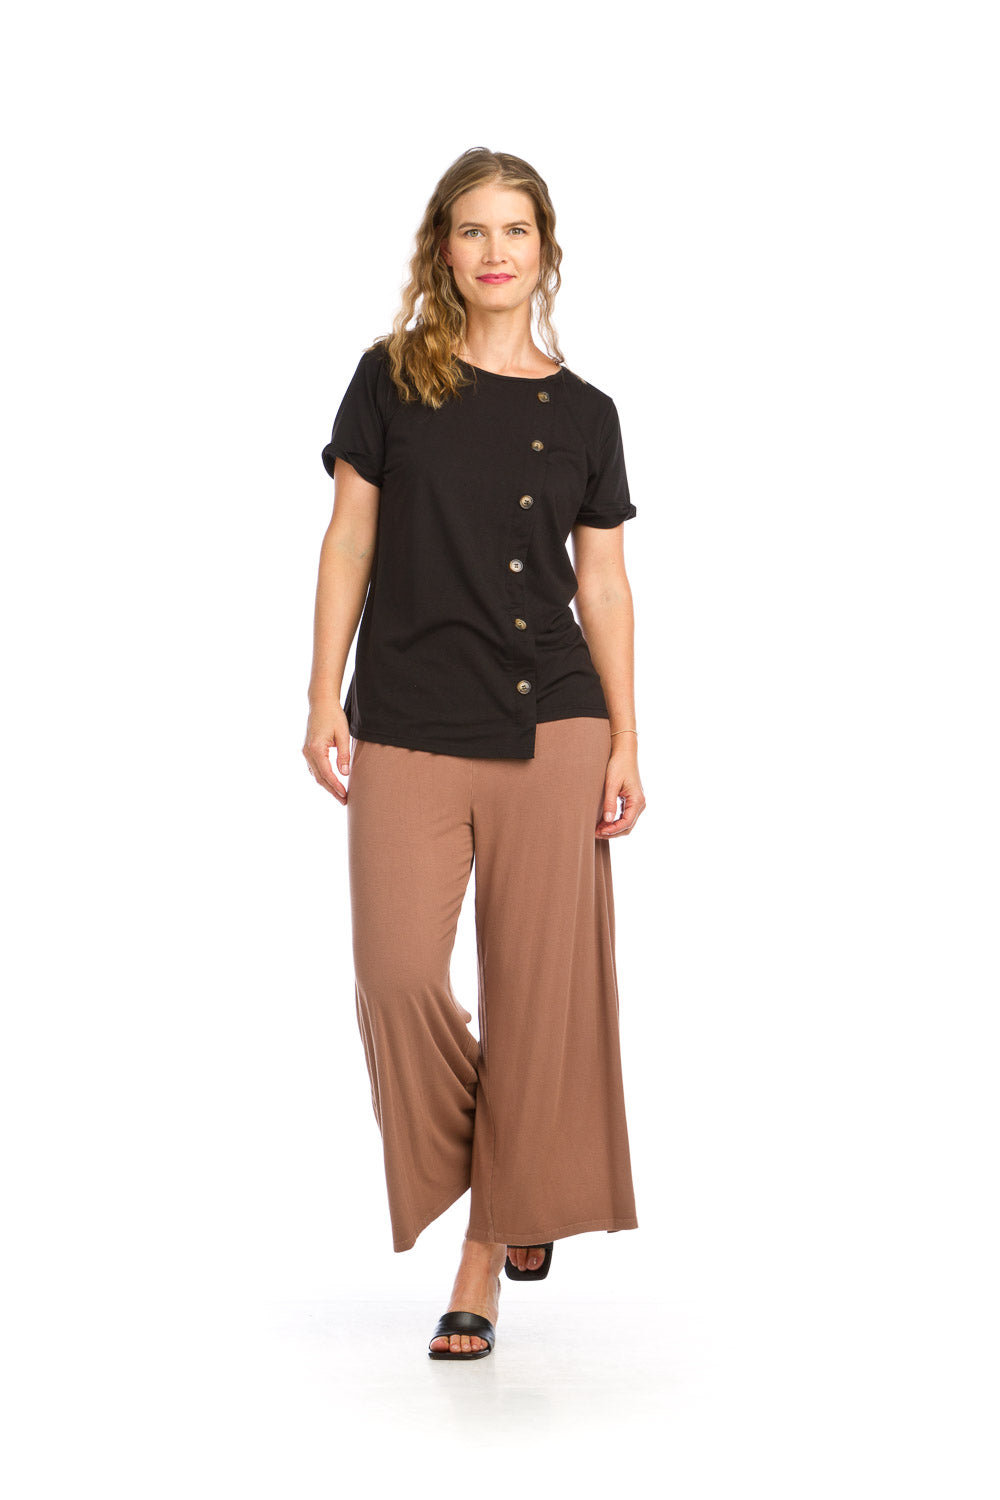 PP16839 MOCHA Bamboo Knit Coulotte Pants